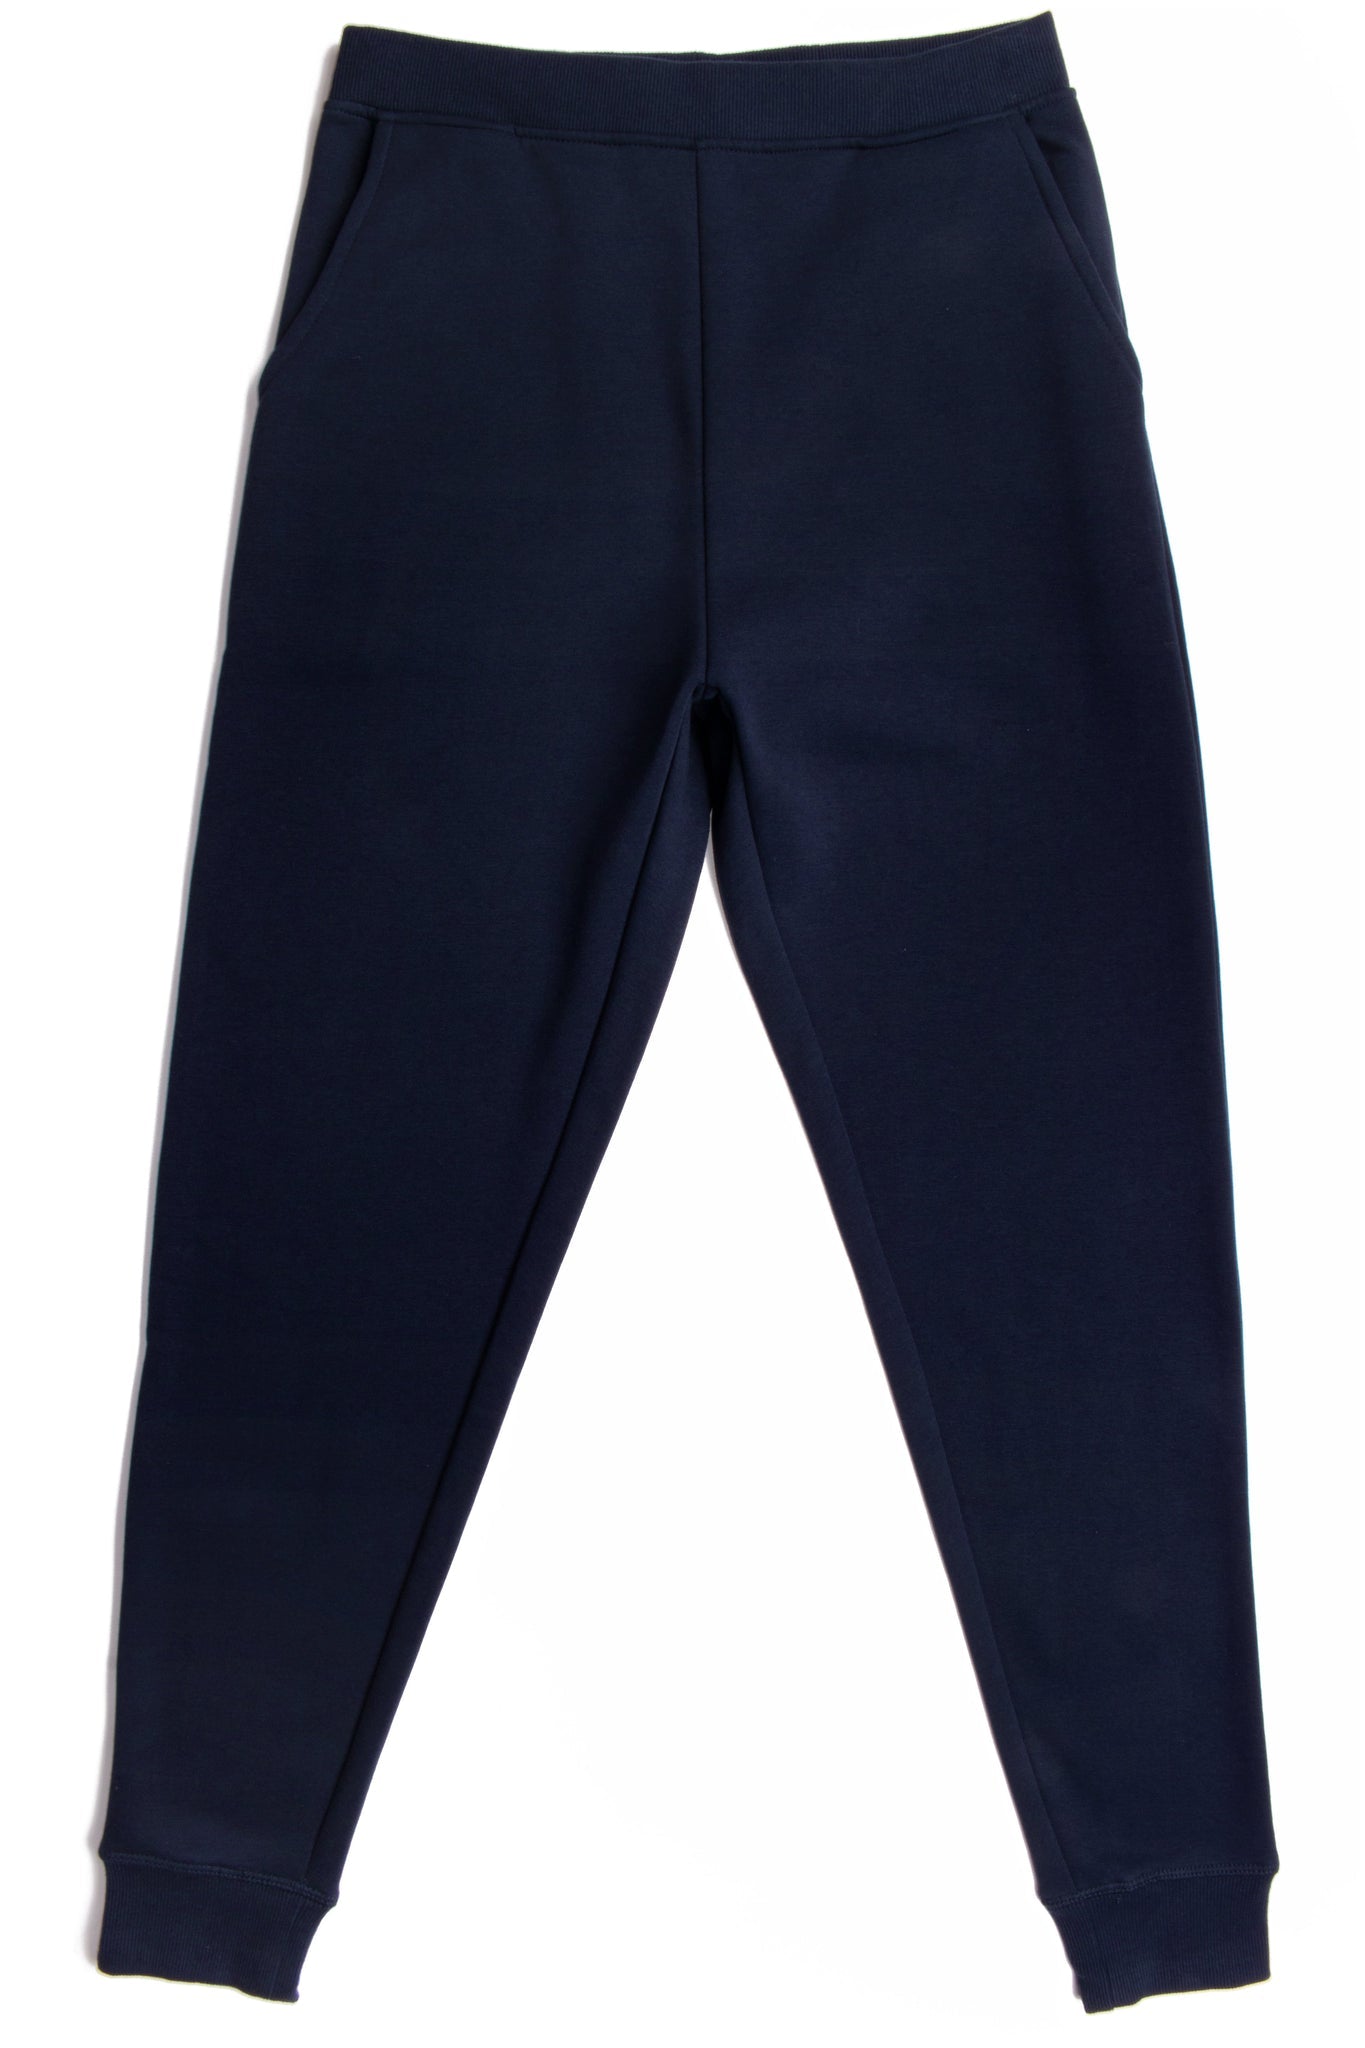 HERO - 5020R Youth Joggers - Navy Blue (Relaxed Fit)